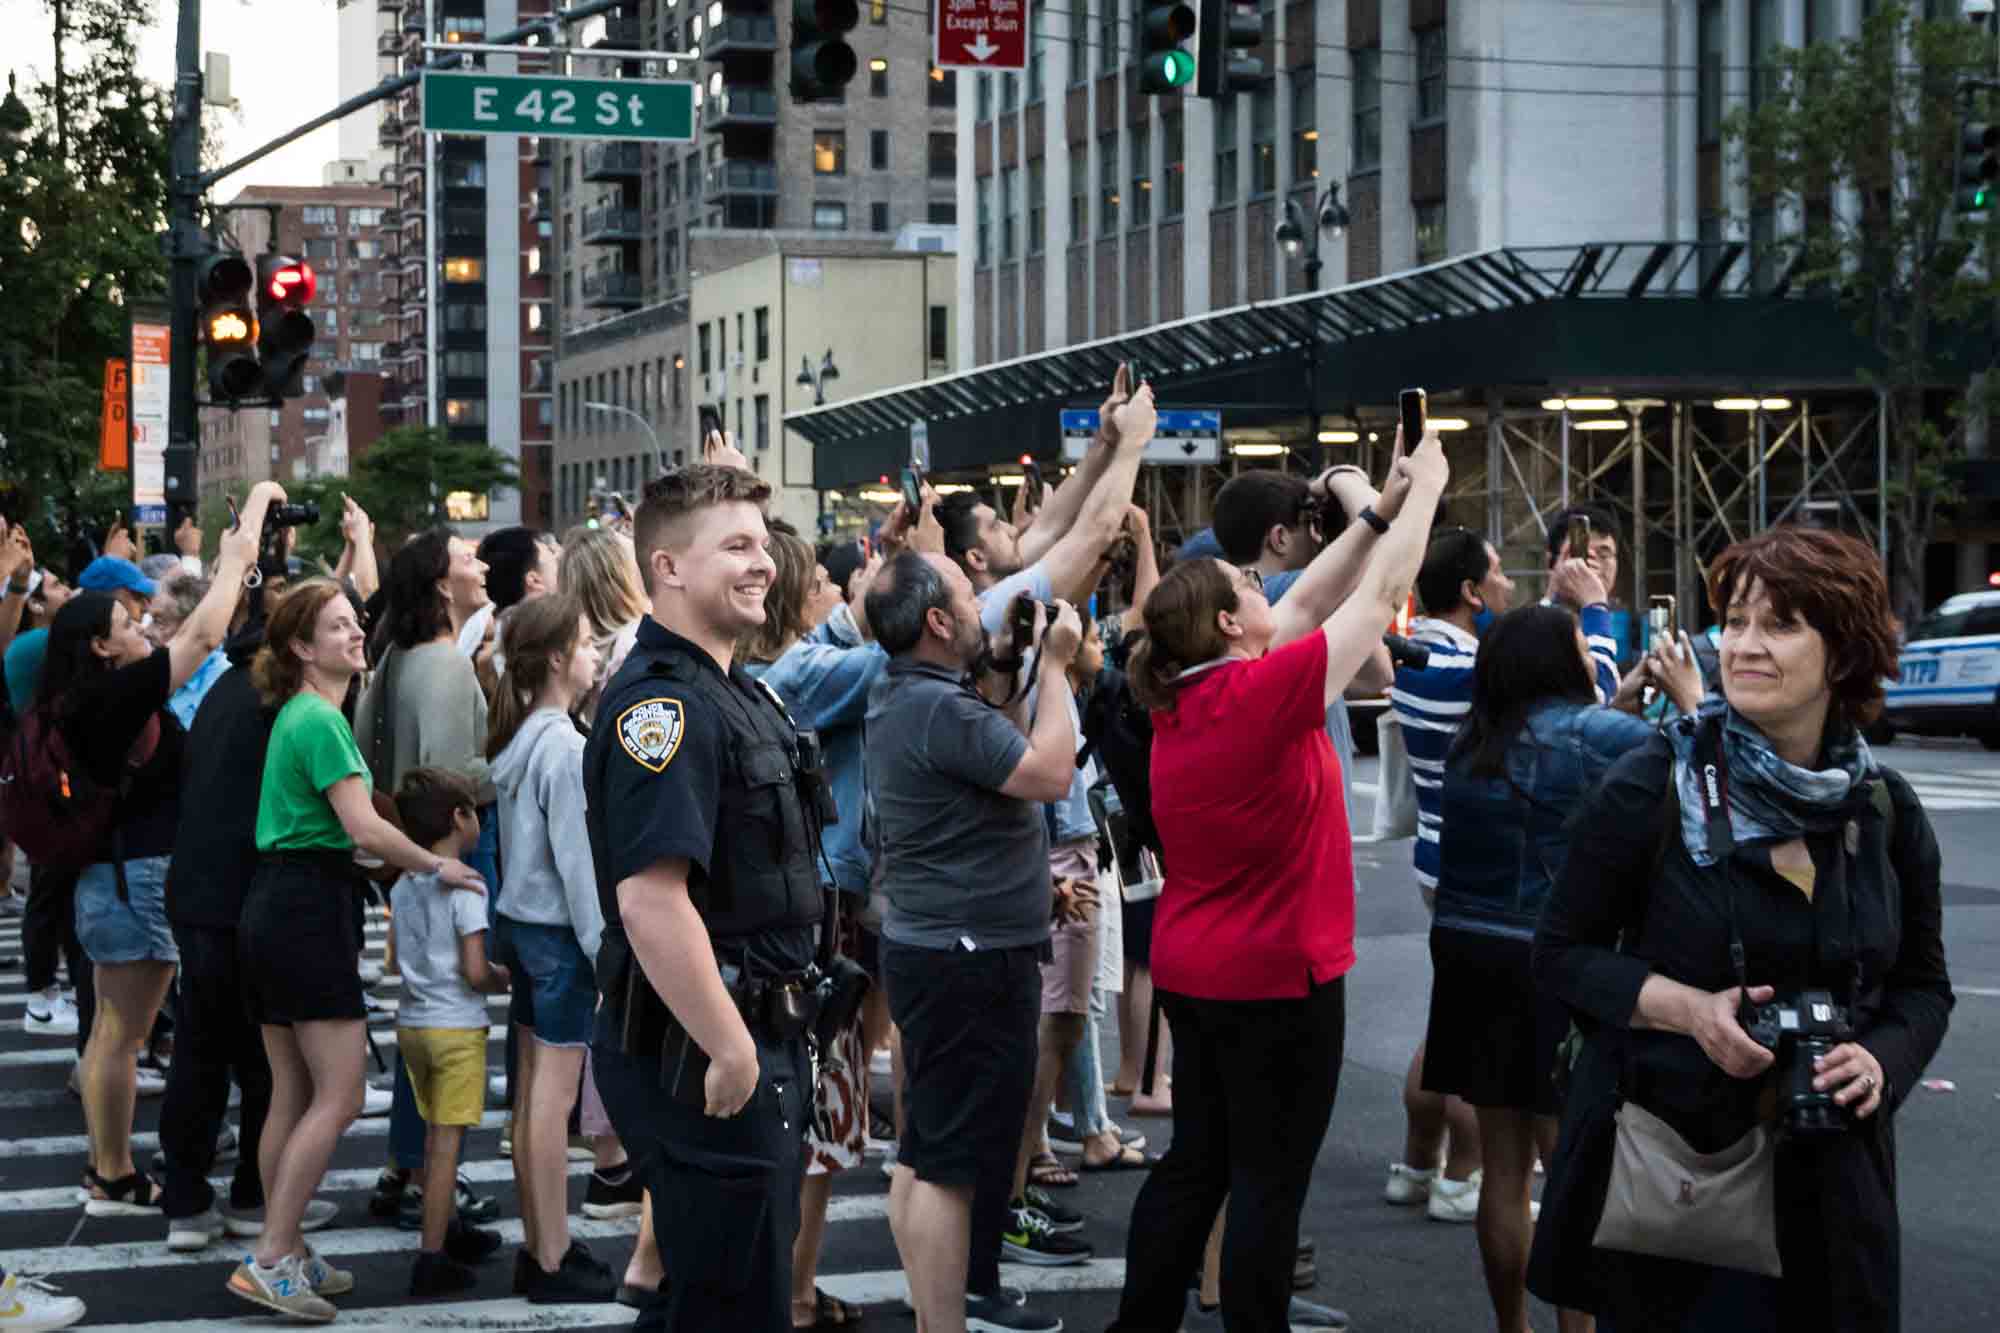 NYPD officer watching tourists in a NYC street with cellphones in hand during Manhattanhenge